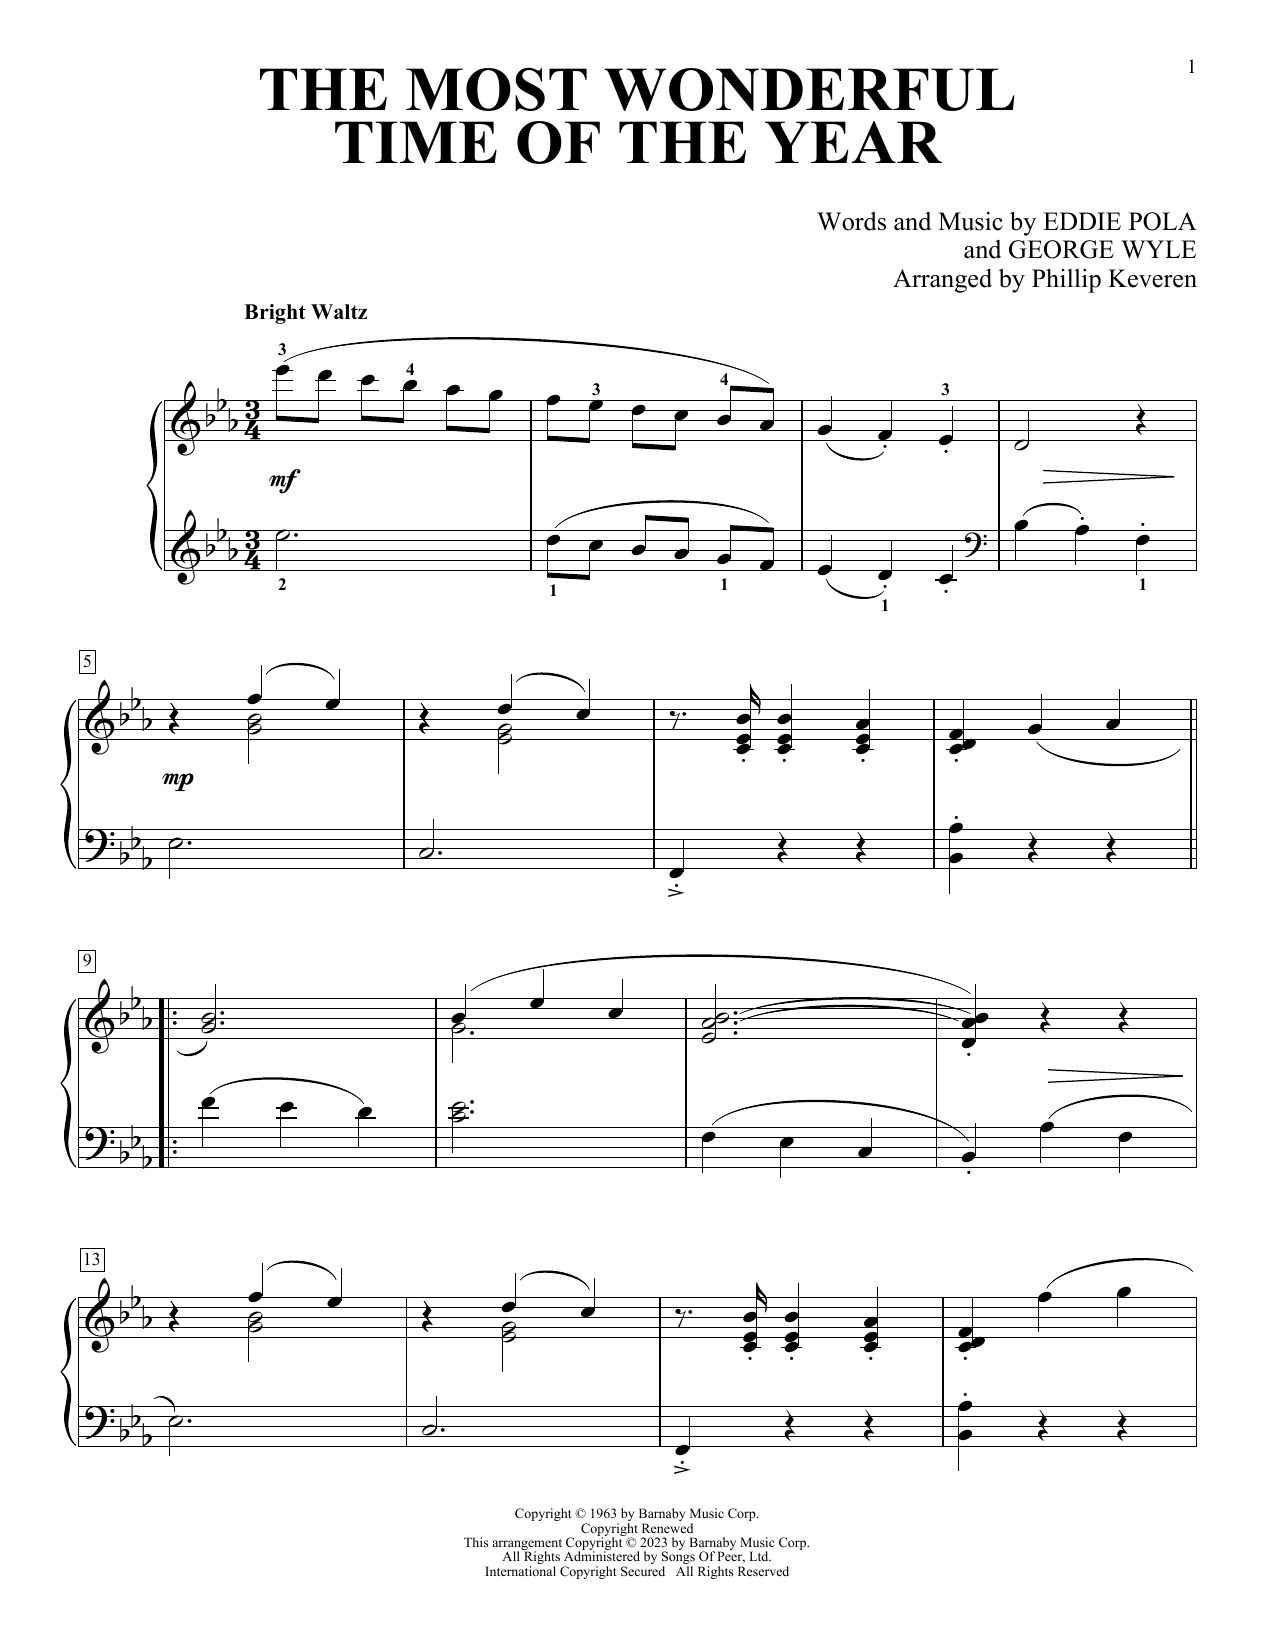 Download Eddie Pola & George Wyle The Most Wonderful Time Of The Year Sheet Music